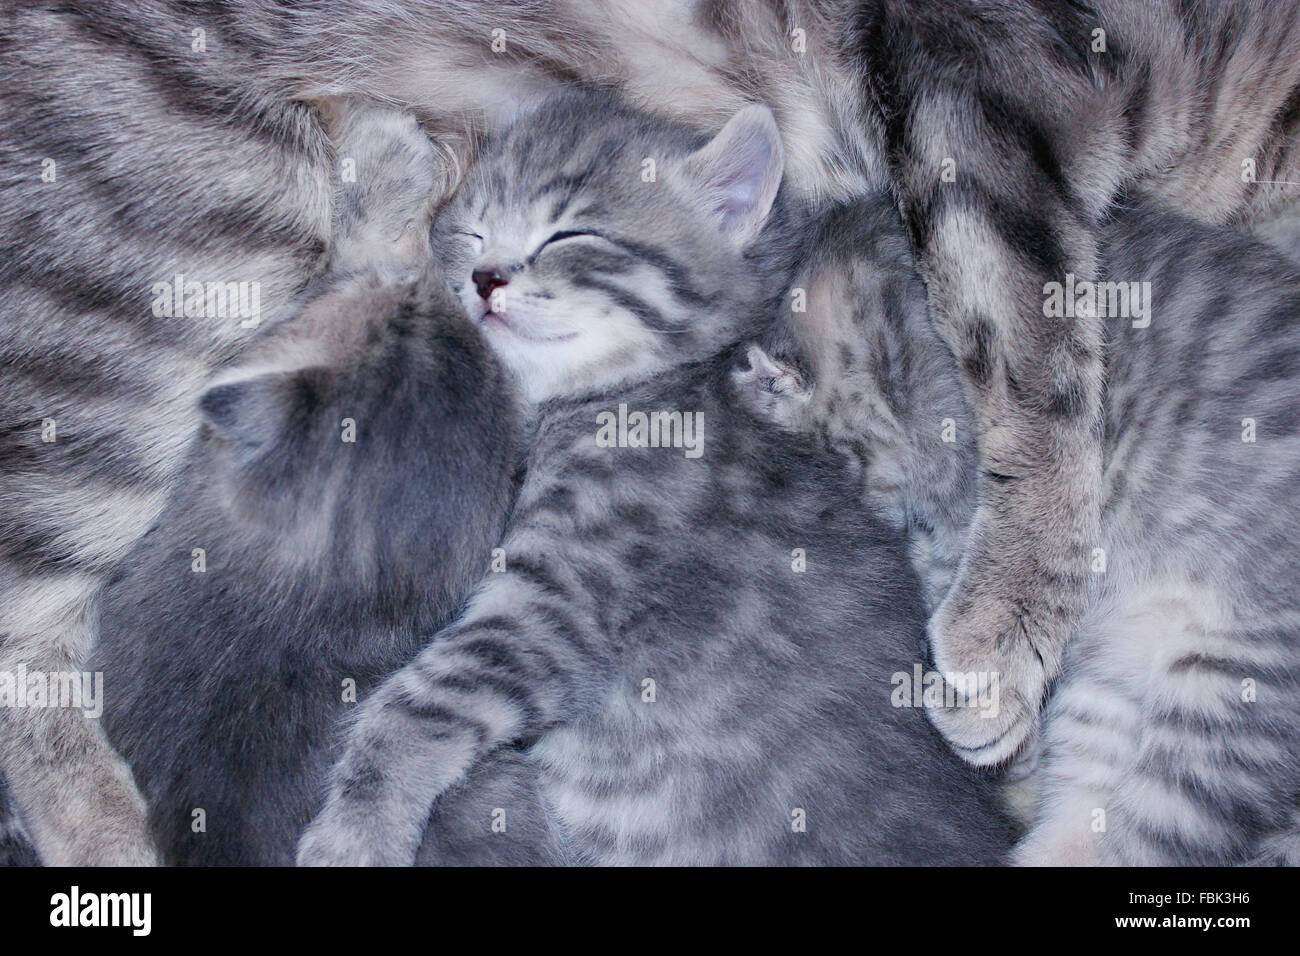 little nice and amusing kittens of Scottish Fold sleep embracing each other Stock Photo